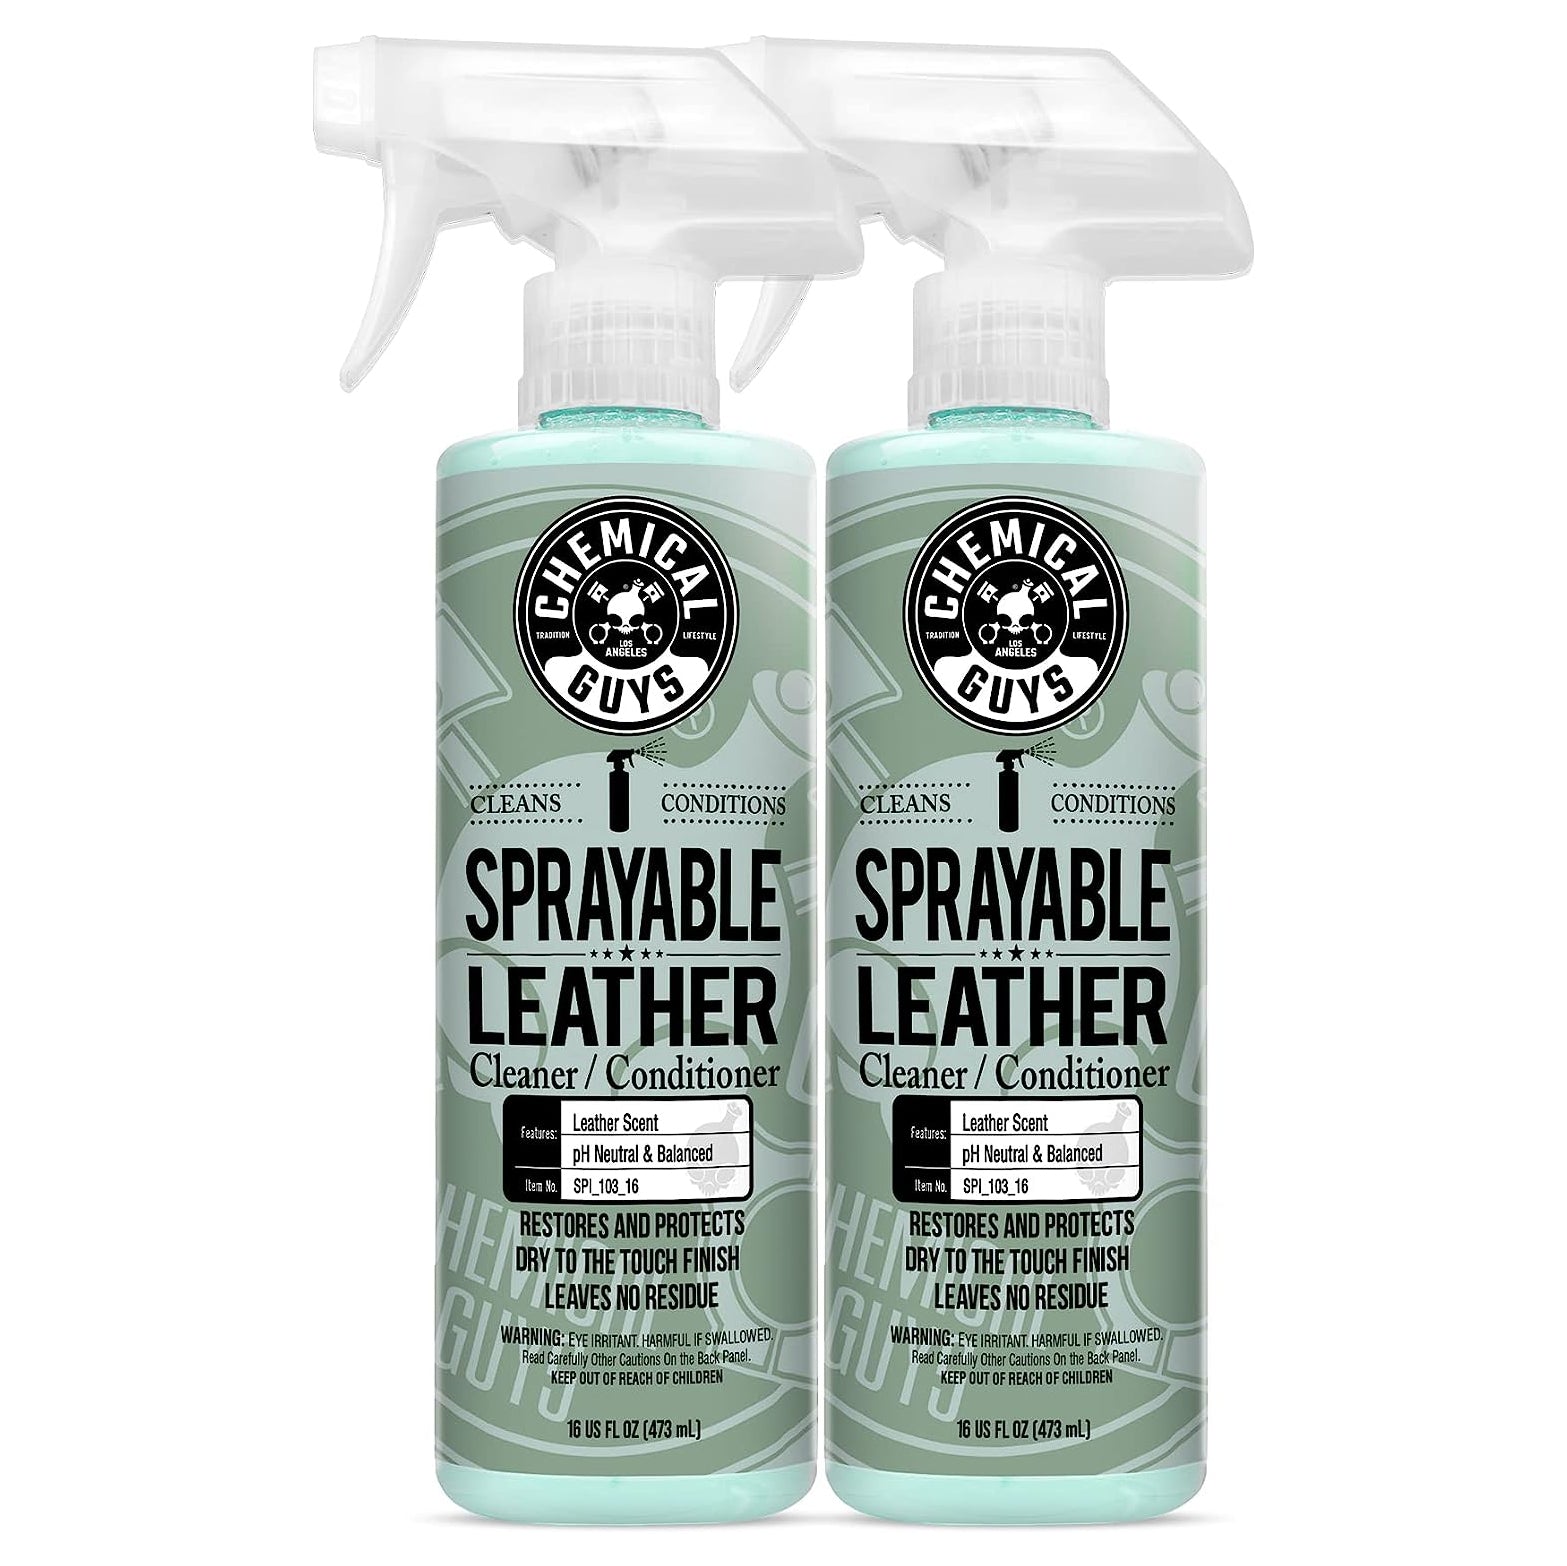 Chemical Guys Leather Scent Premium Air Freshener and Odor